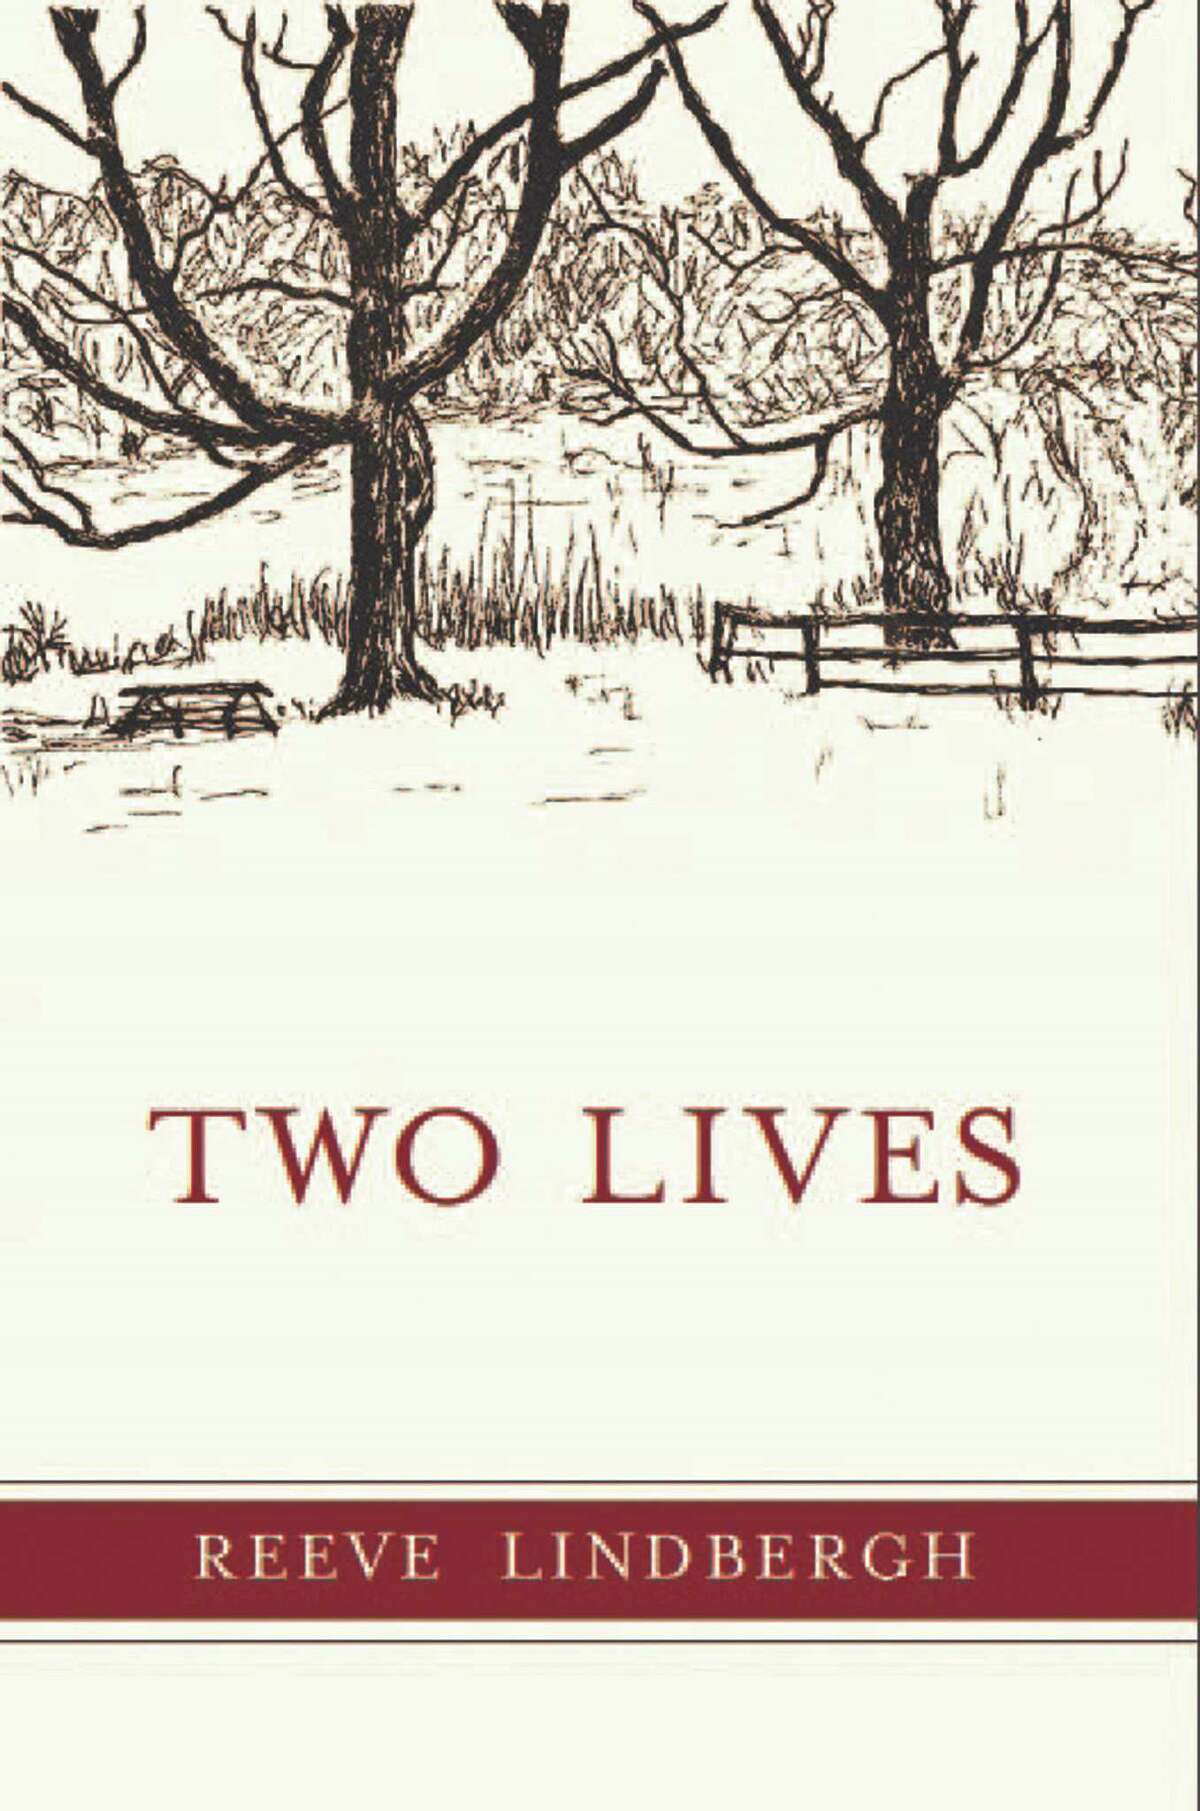 Reeve Lindbergh, daughter of the late aviator Charles Lindbergh and author Anne Morrow Lindbergh, recently released her latest memoir, "Two Lives." The book speaks to the dual demands of growing up in a famous family and leading a private life on a Vermont farm. Lindbergh grew up in Darien.